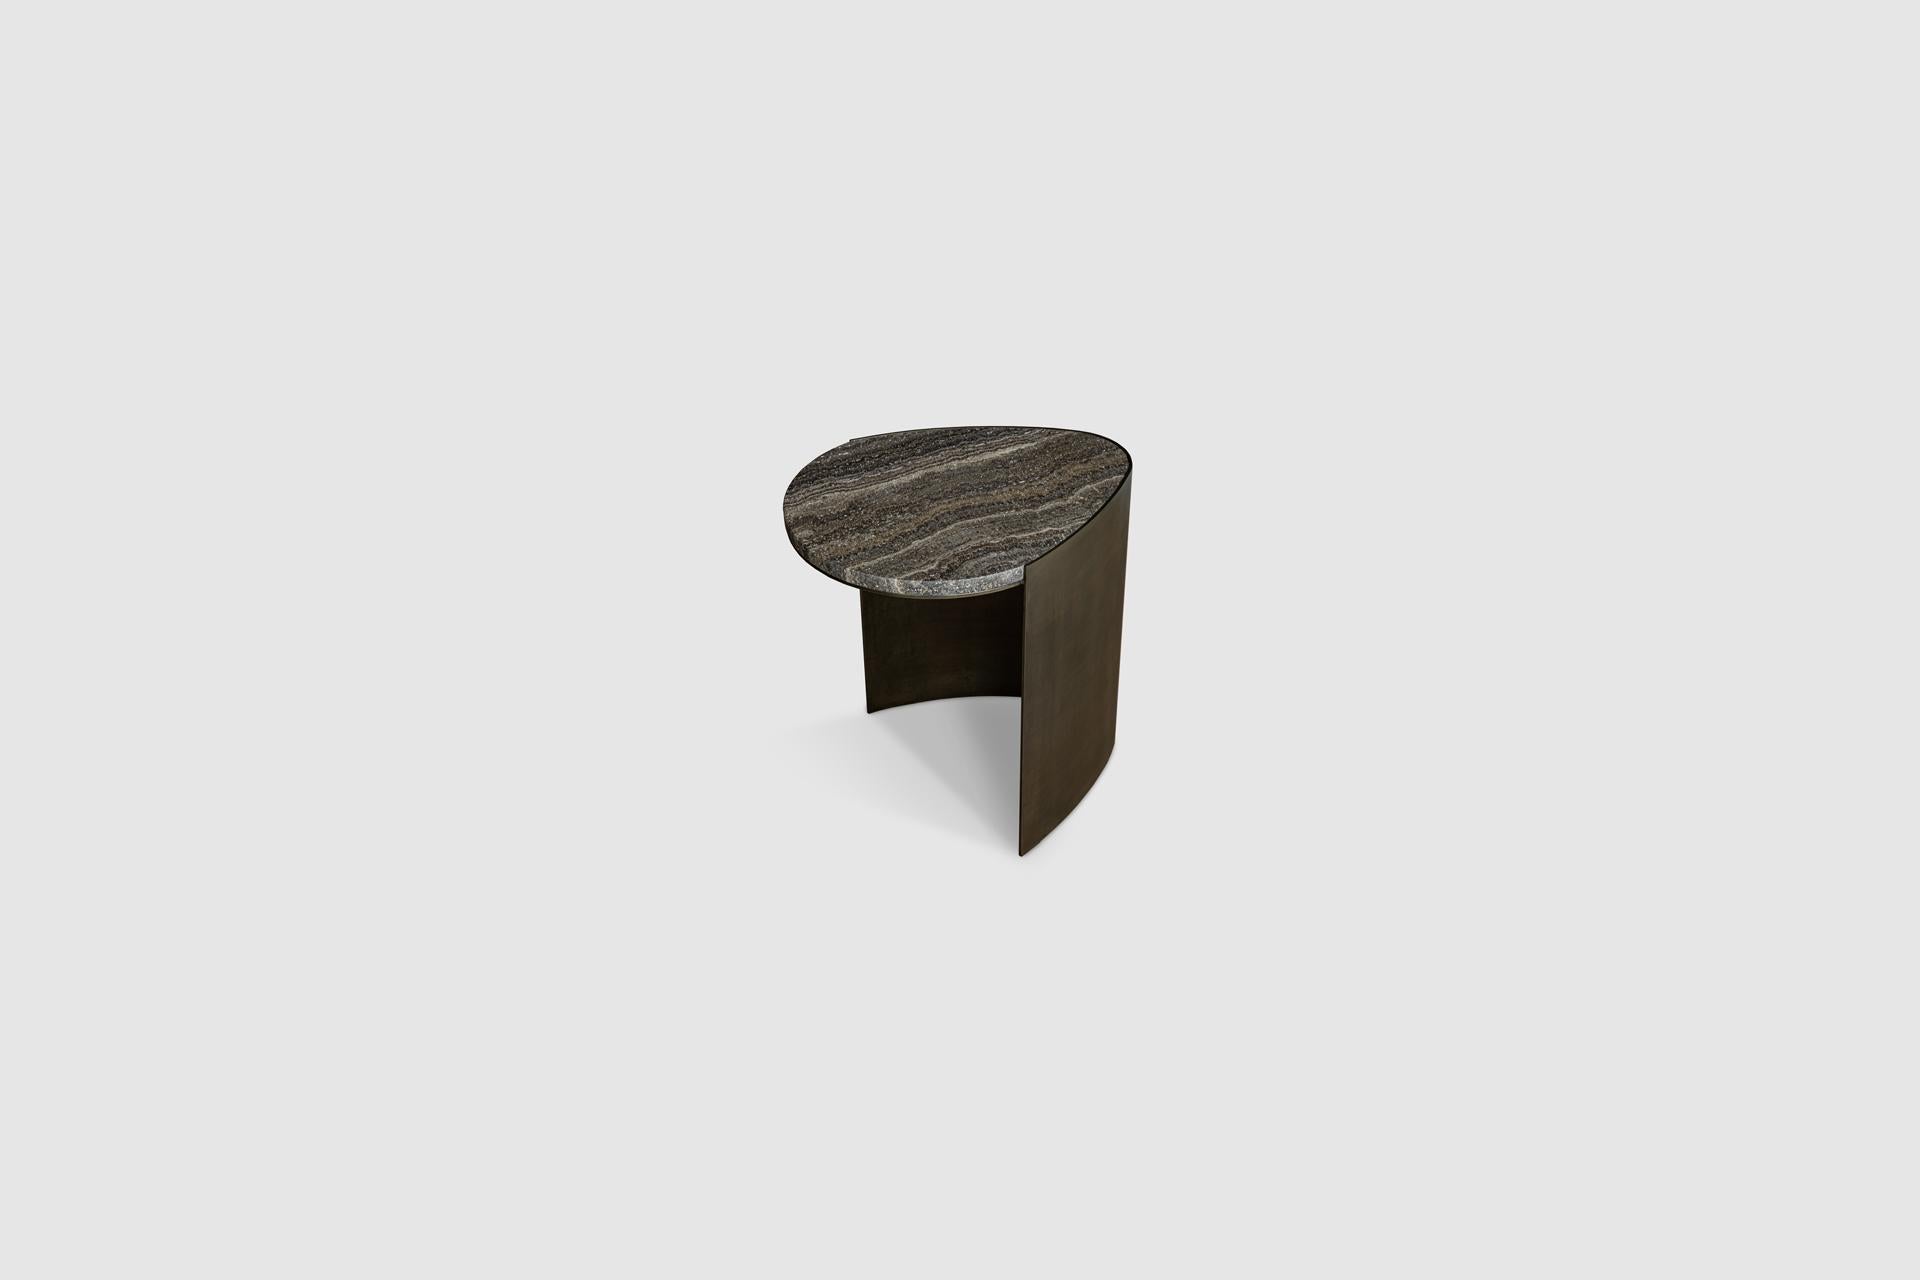 Travertine teardrop side table by Atra Design.
Dimensions: D 45 x W 38 x H 40 cm
Materials: Travertine silver, aged brass.
Available in other stones: Travertine silver, Tikal green marble, Negro Monterrey marble.
Also available in gold or black